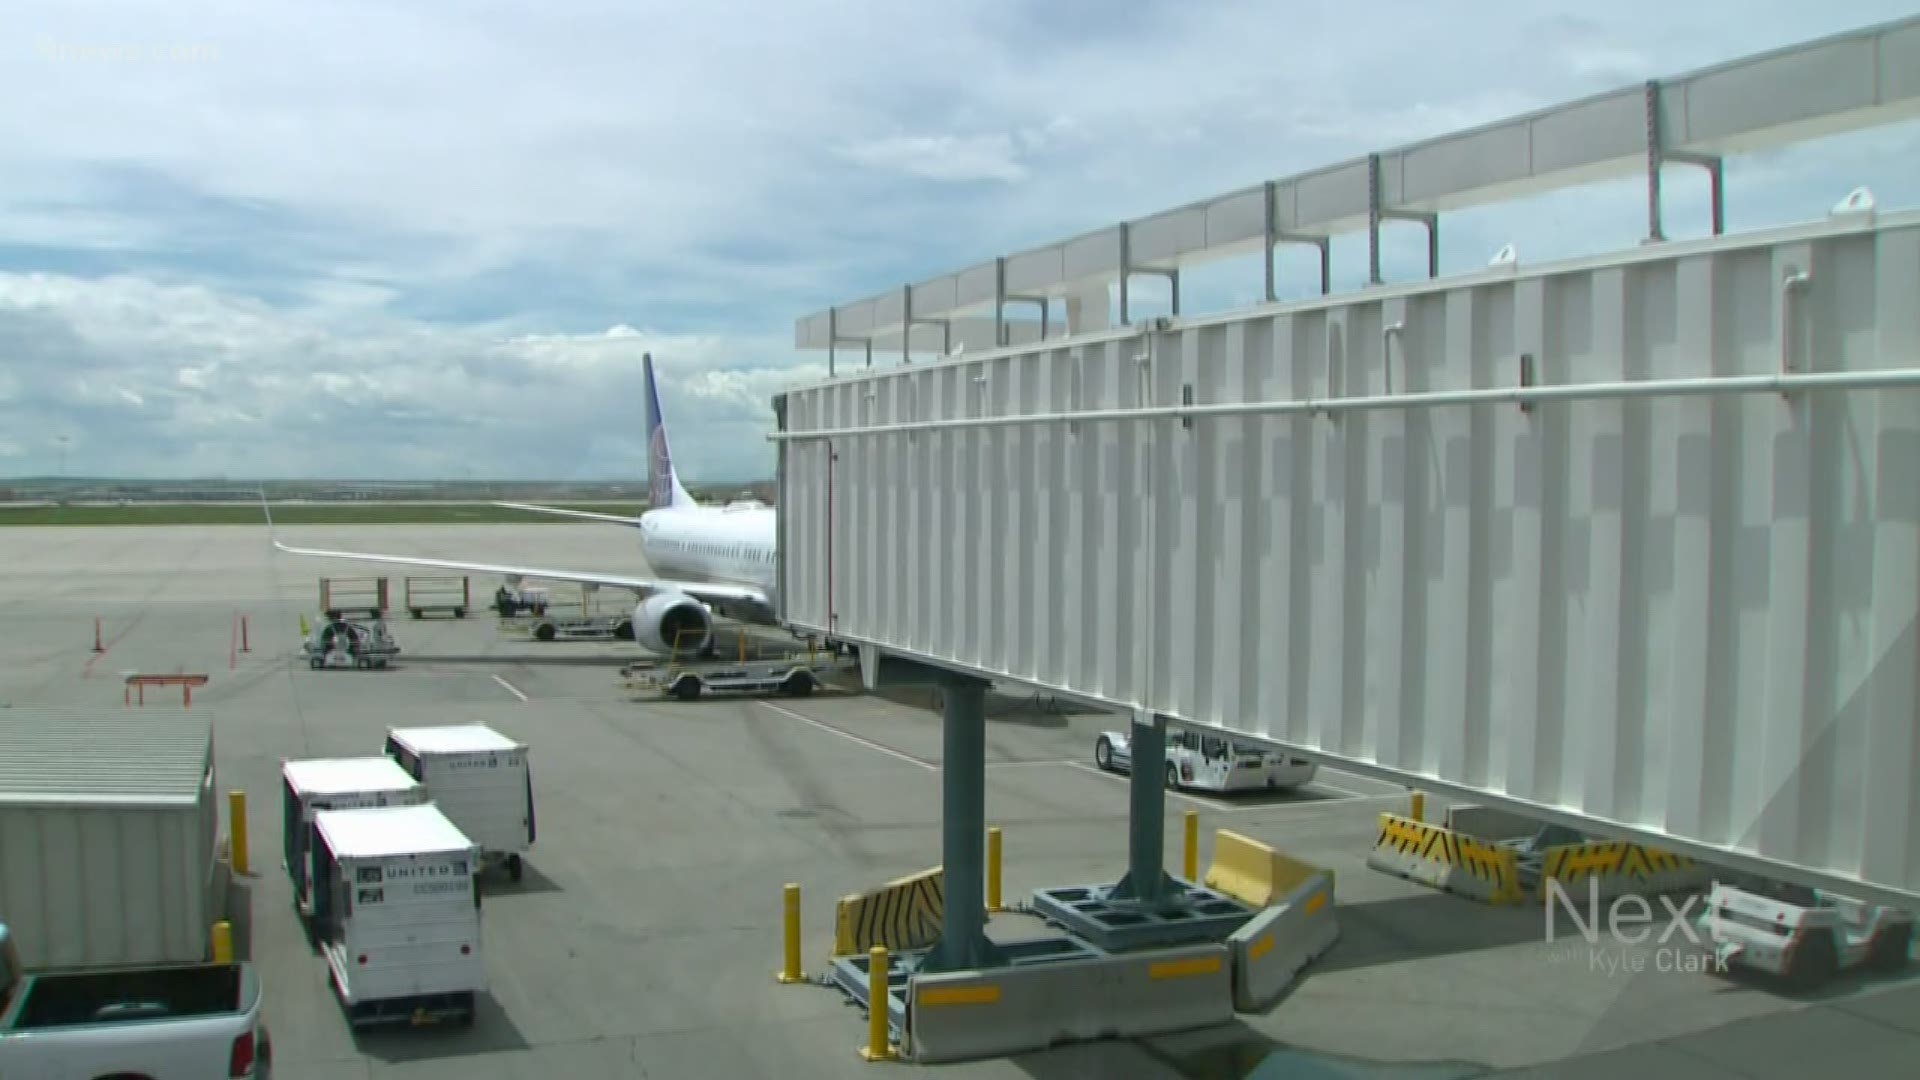 Our Next Question is about United Airlines signing a lease for a ton of new space at the airport - 24 gates.